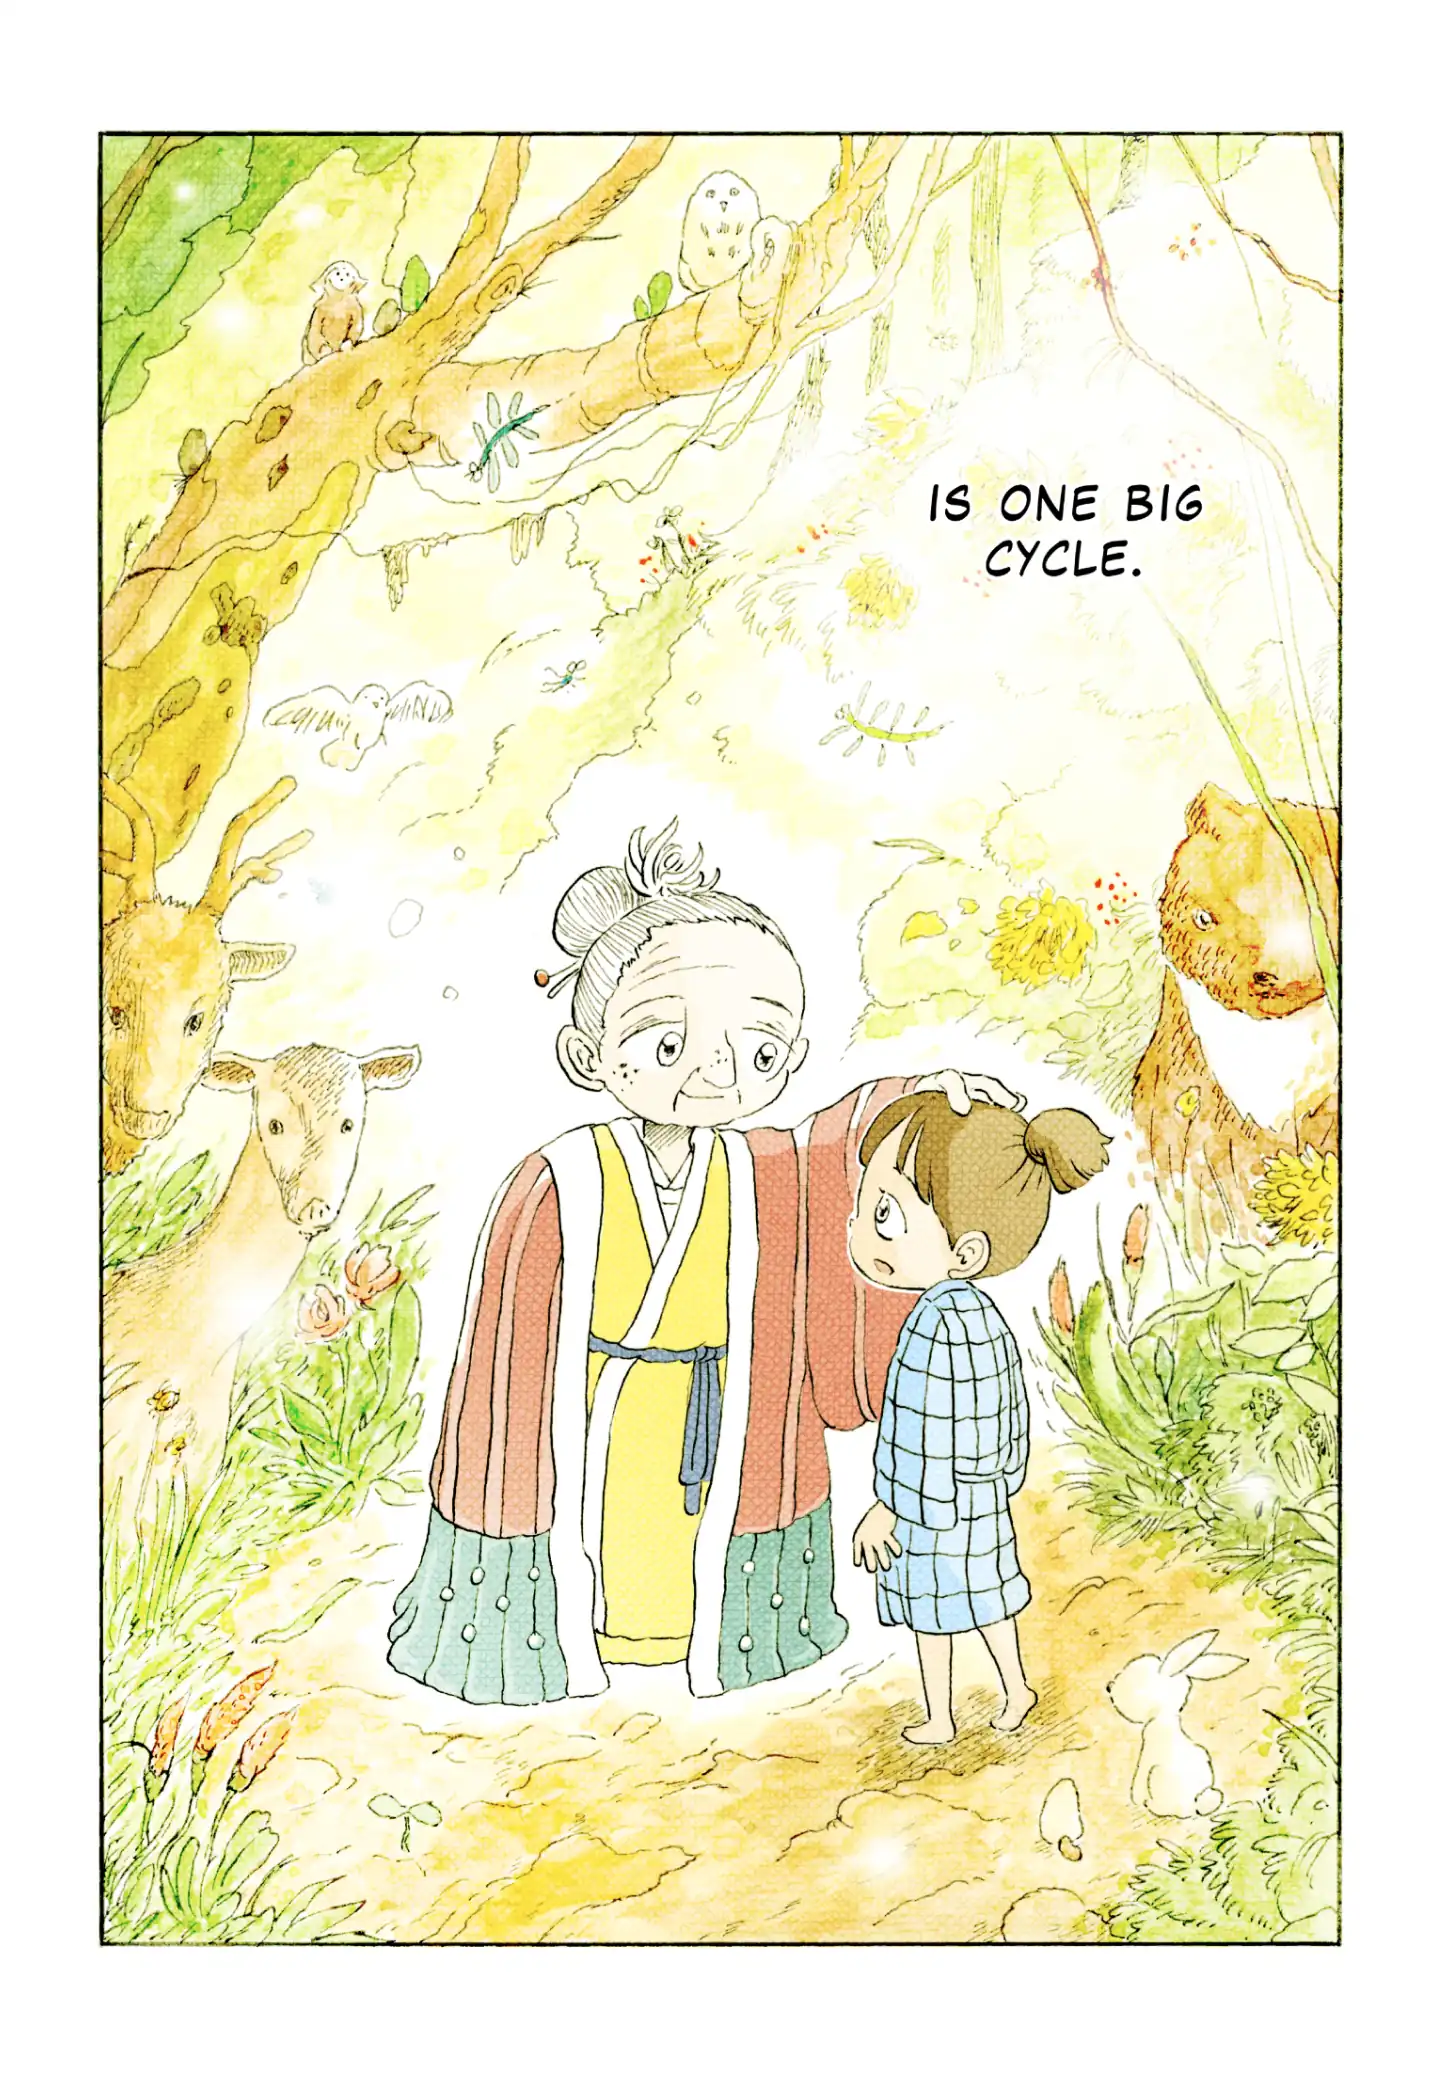 “IS ONE BIG CYCLE.” Her grandmother is stroking Miko's head with a gentle smile. Behind them are different plants and animals.   The end.